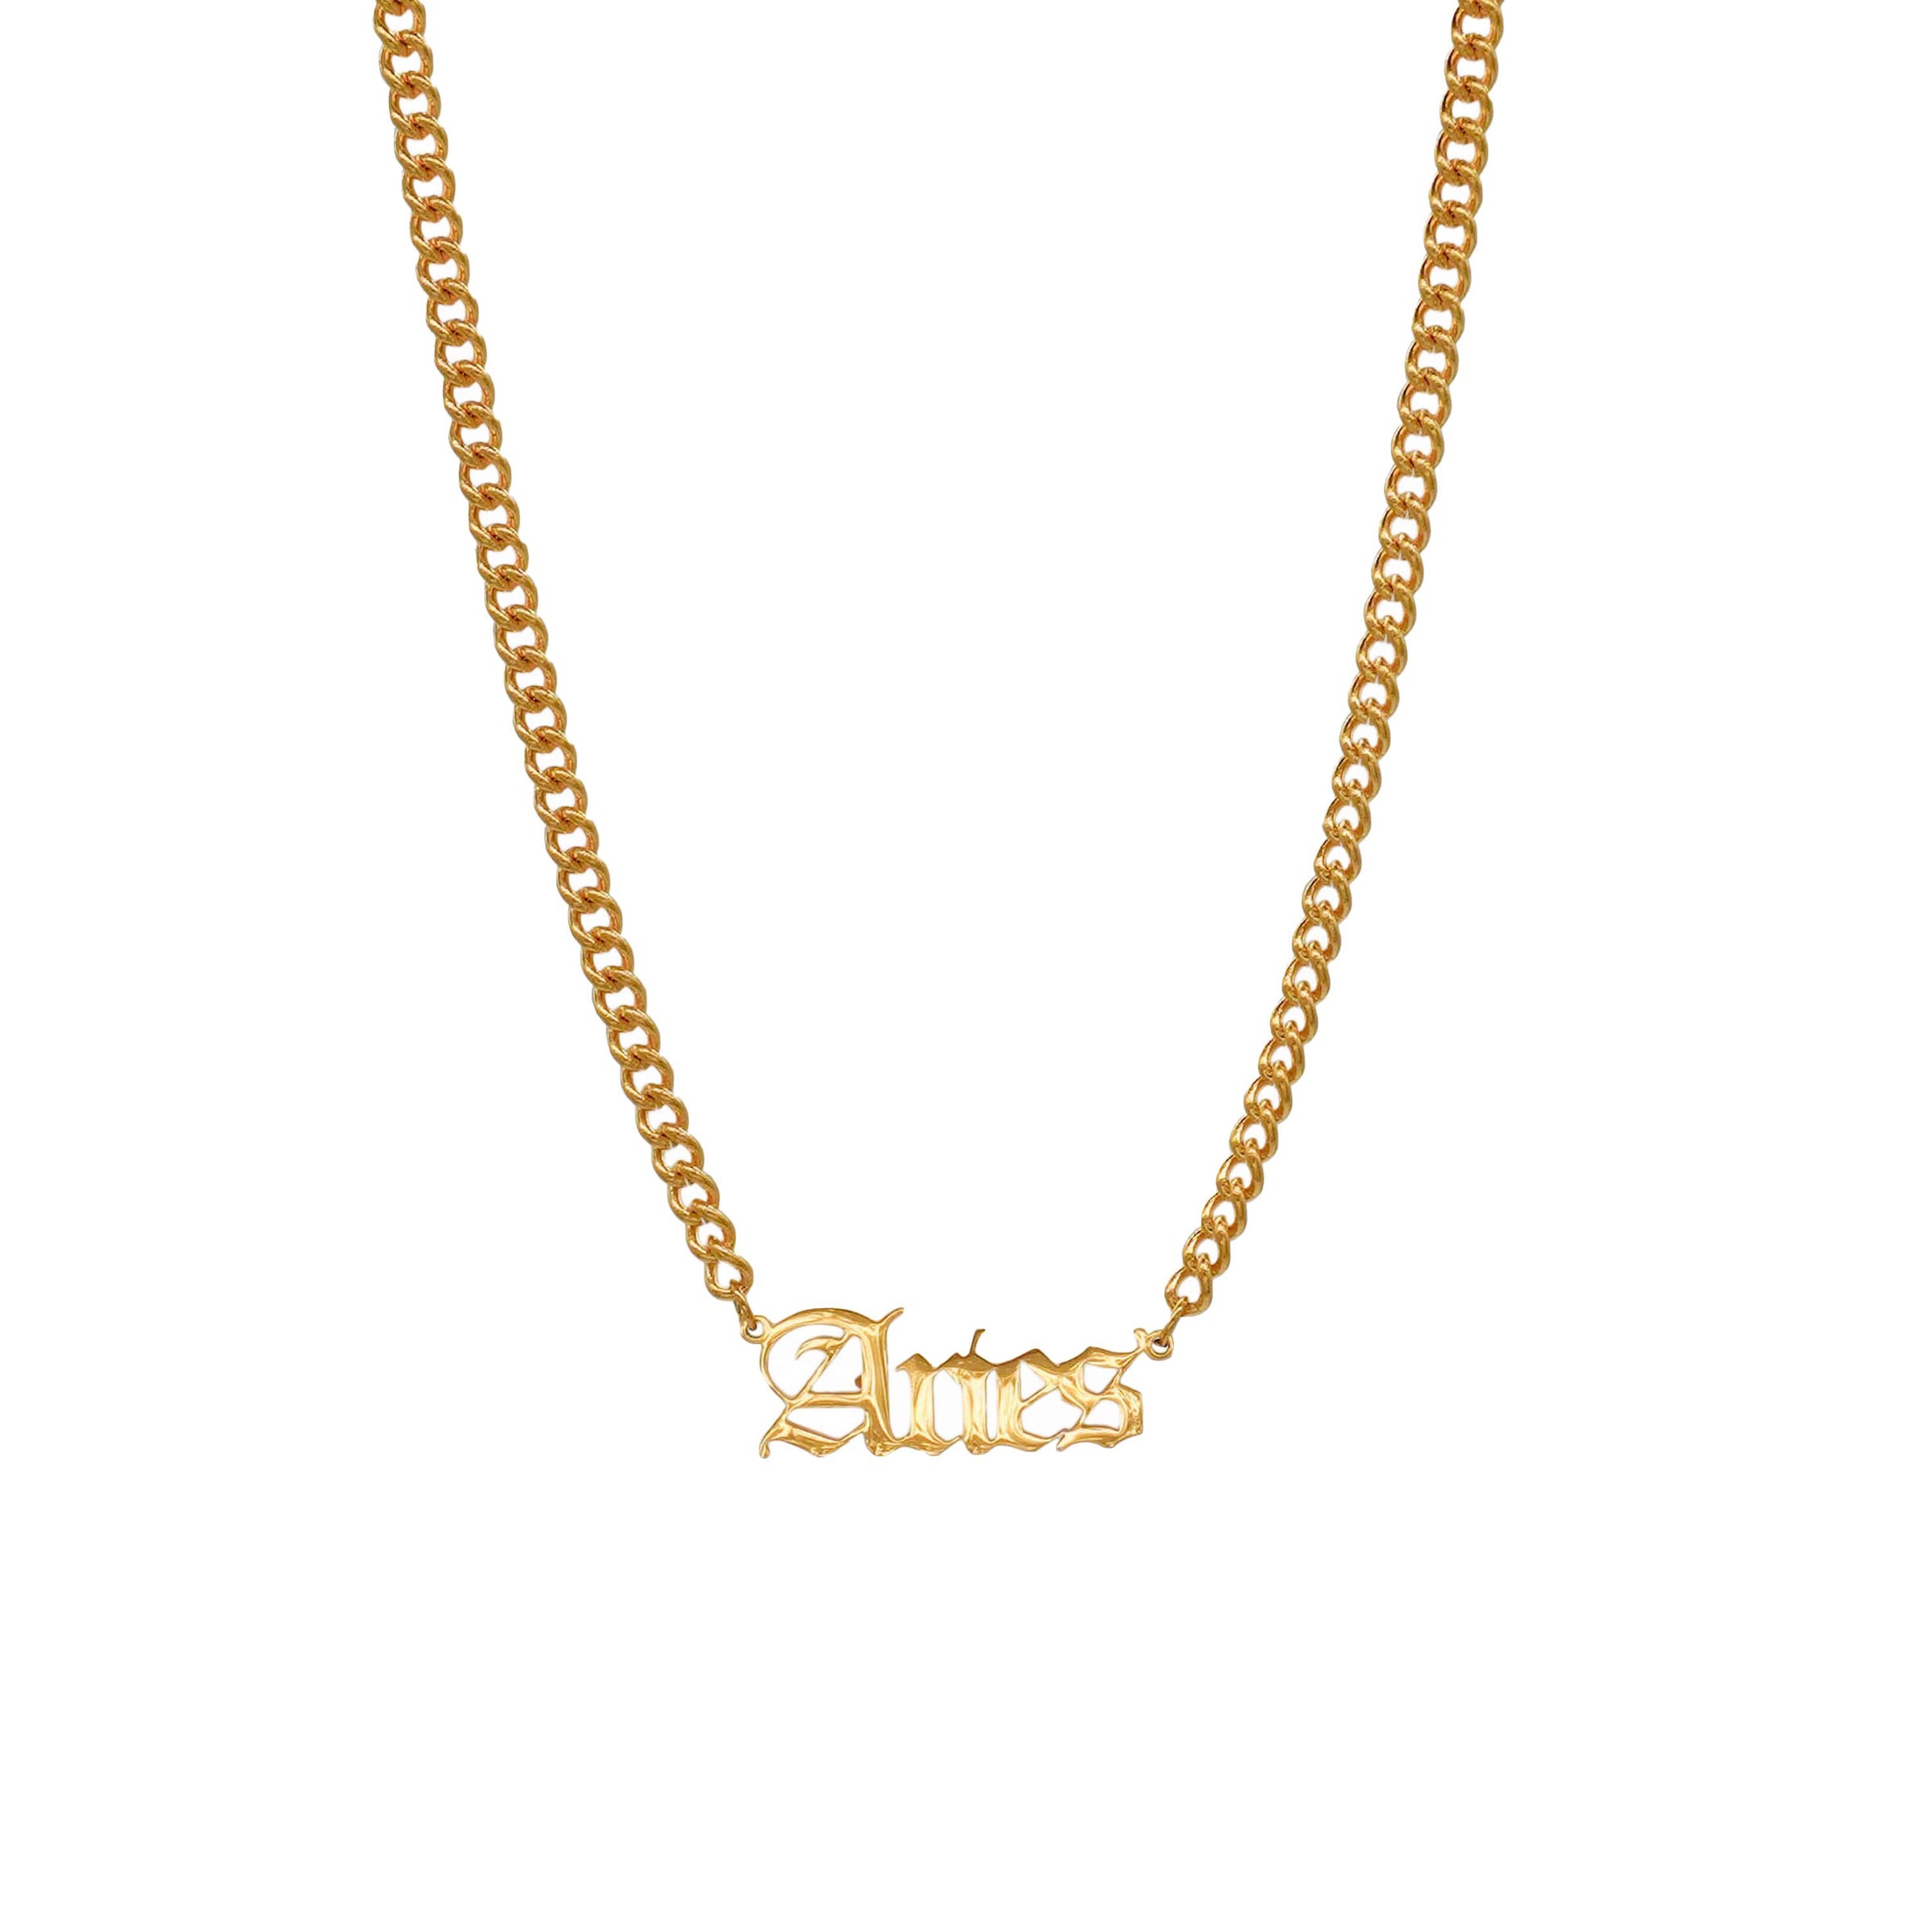 Starborn Patterns 18k Gold Plated Stainless Steel Zodiac Sign Astrology Cuban Chain Link Necklace with Aries Old English Font Charm